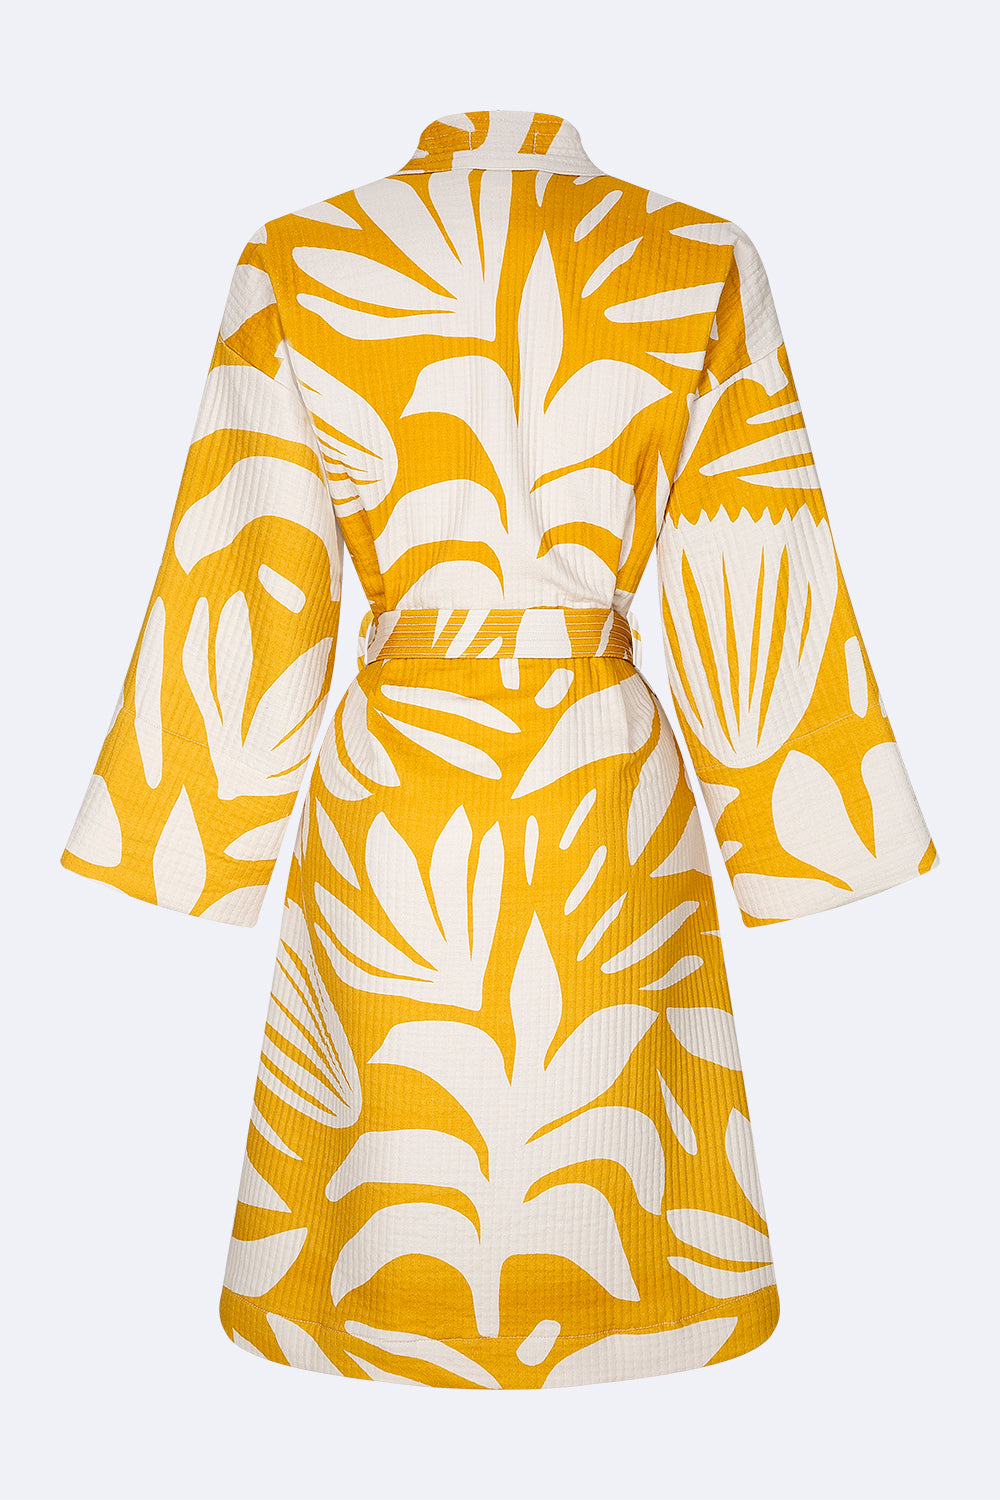 Yellow and white kimono - 100% cotton with contemporary pattern in warm yellow and off white, can be used as a bathrobe, homerobe or jacket